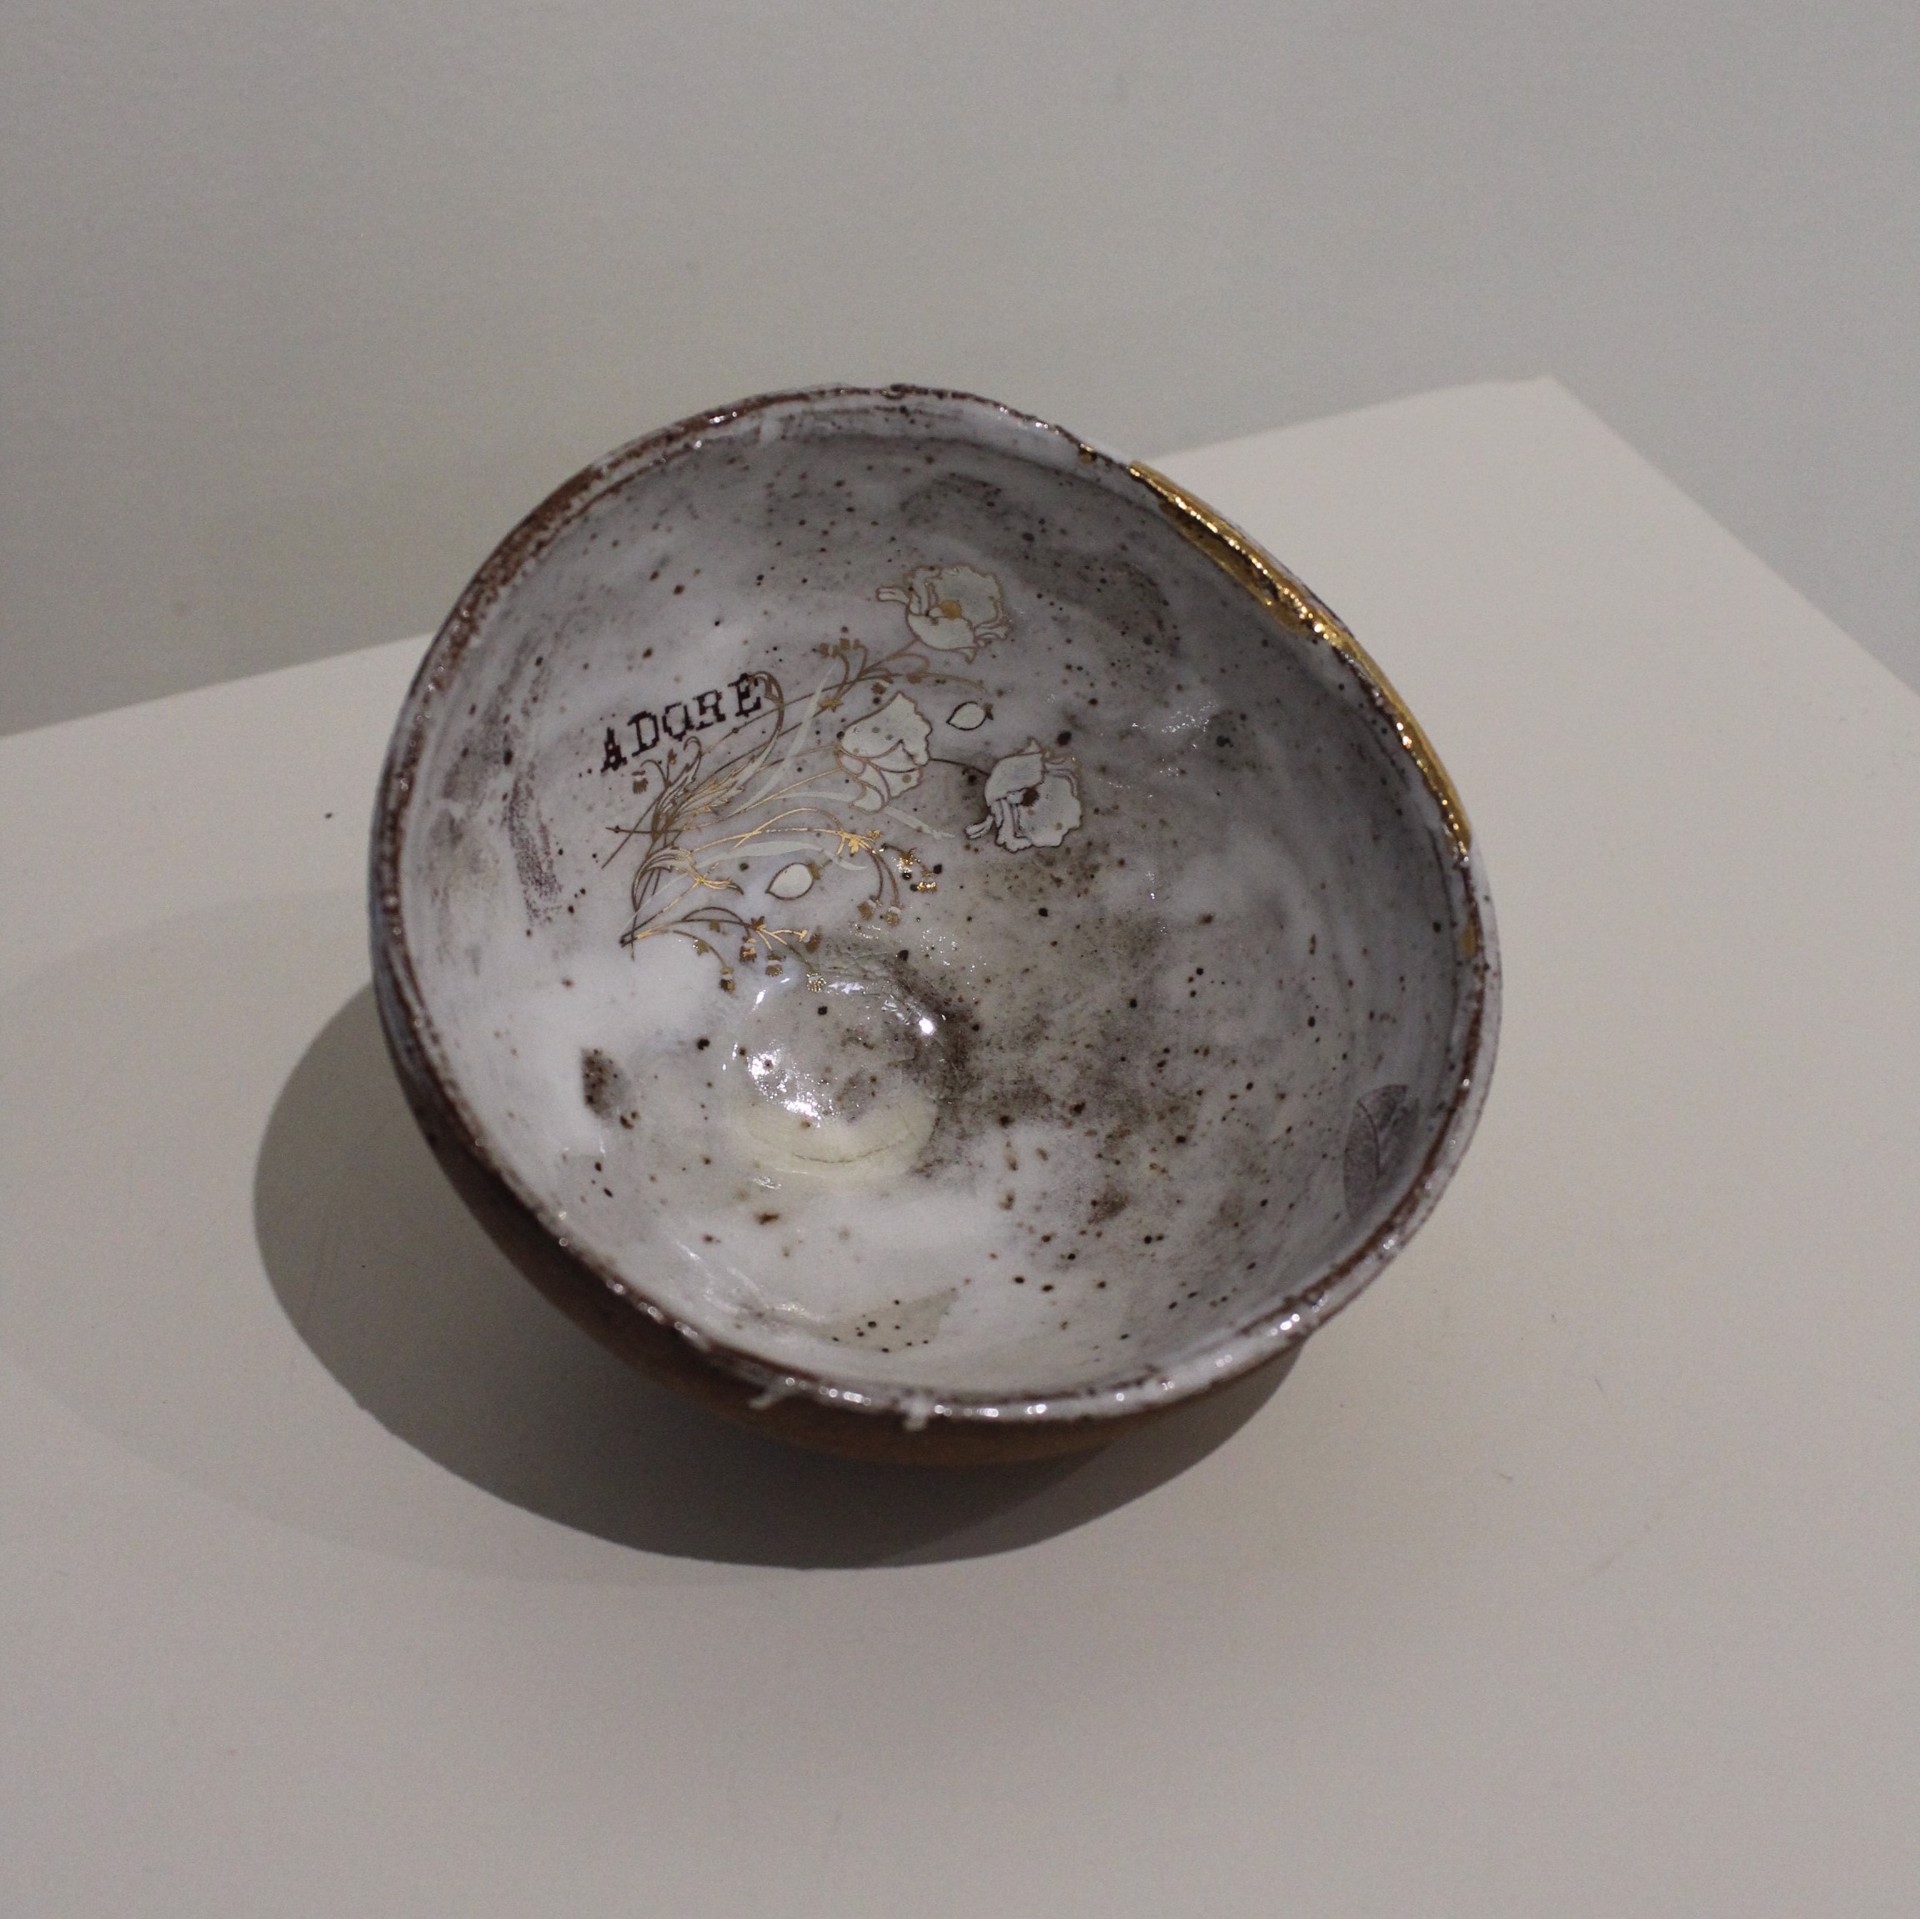 Tea Bowl 4 (adore) by Therese Knowles